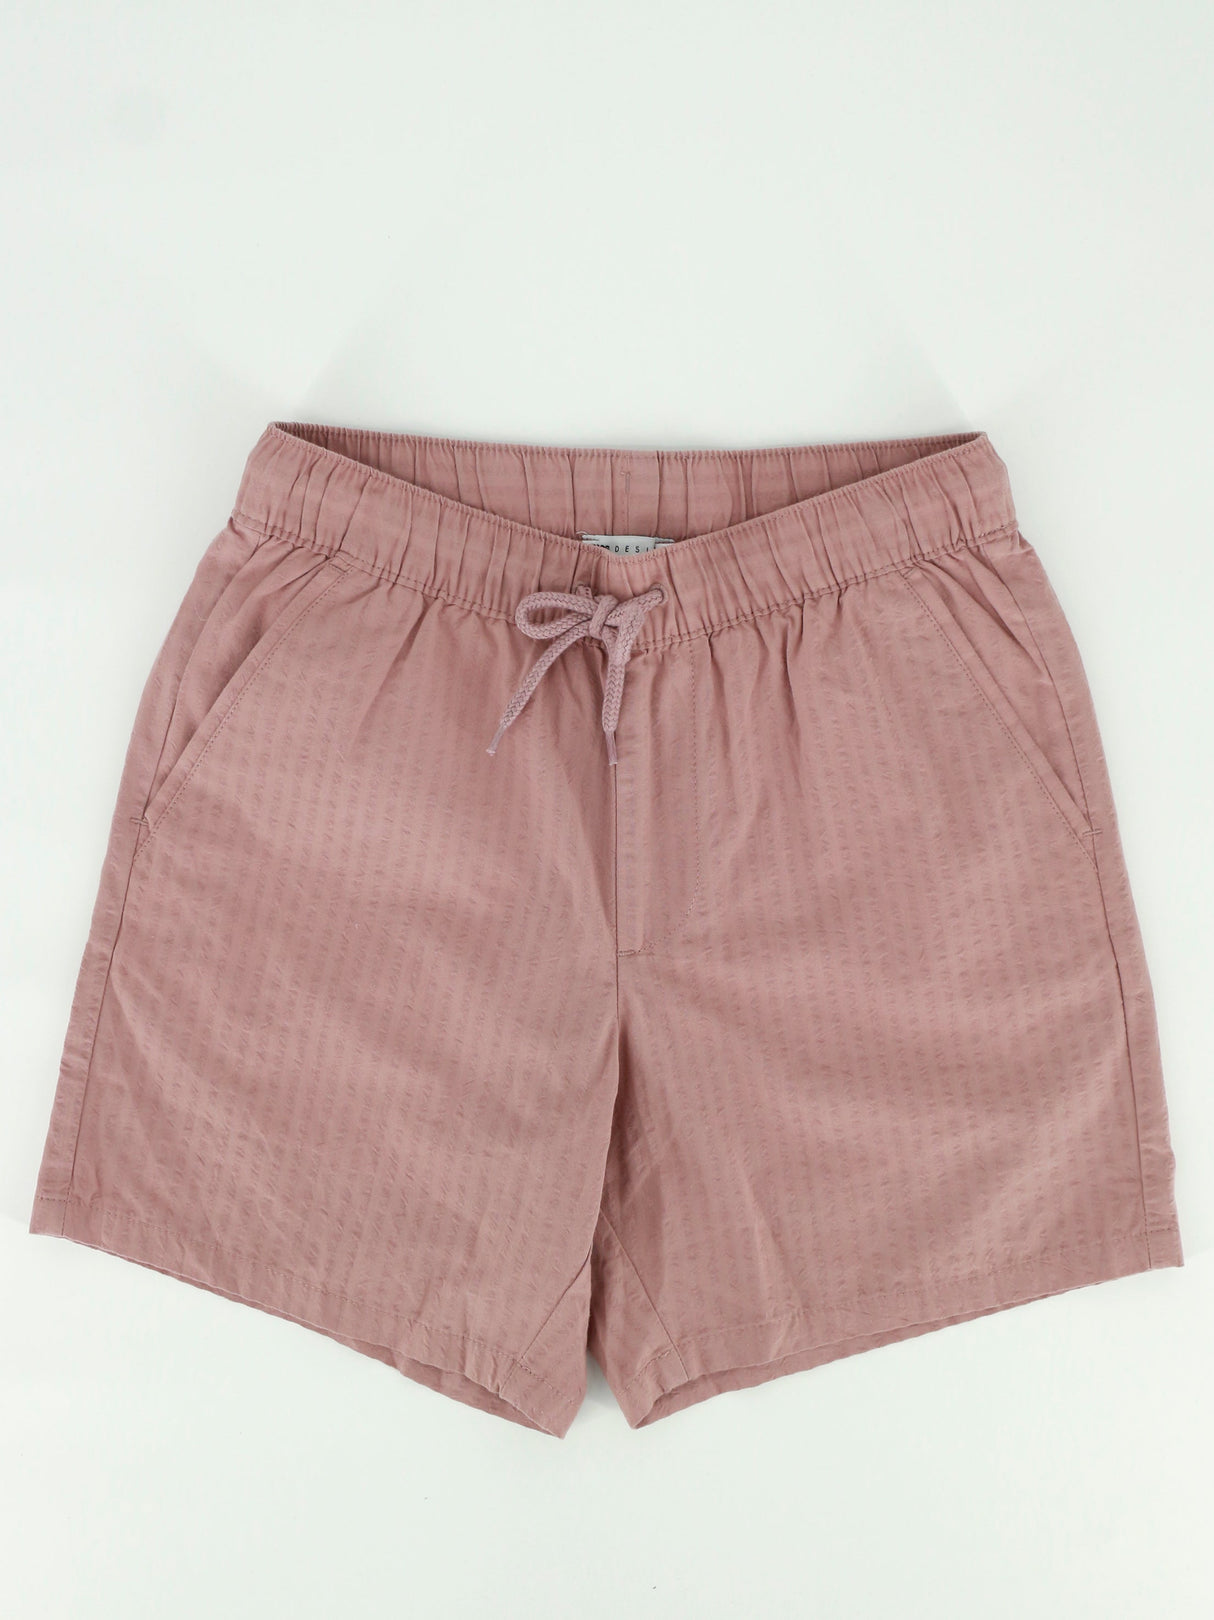 Image for Men's Textured Short,Nude Pink